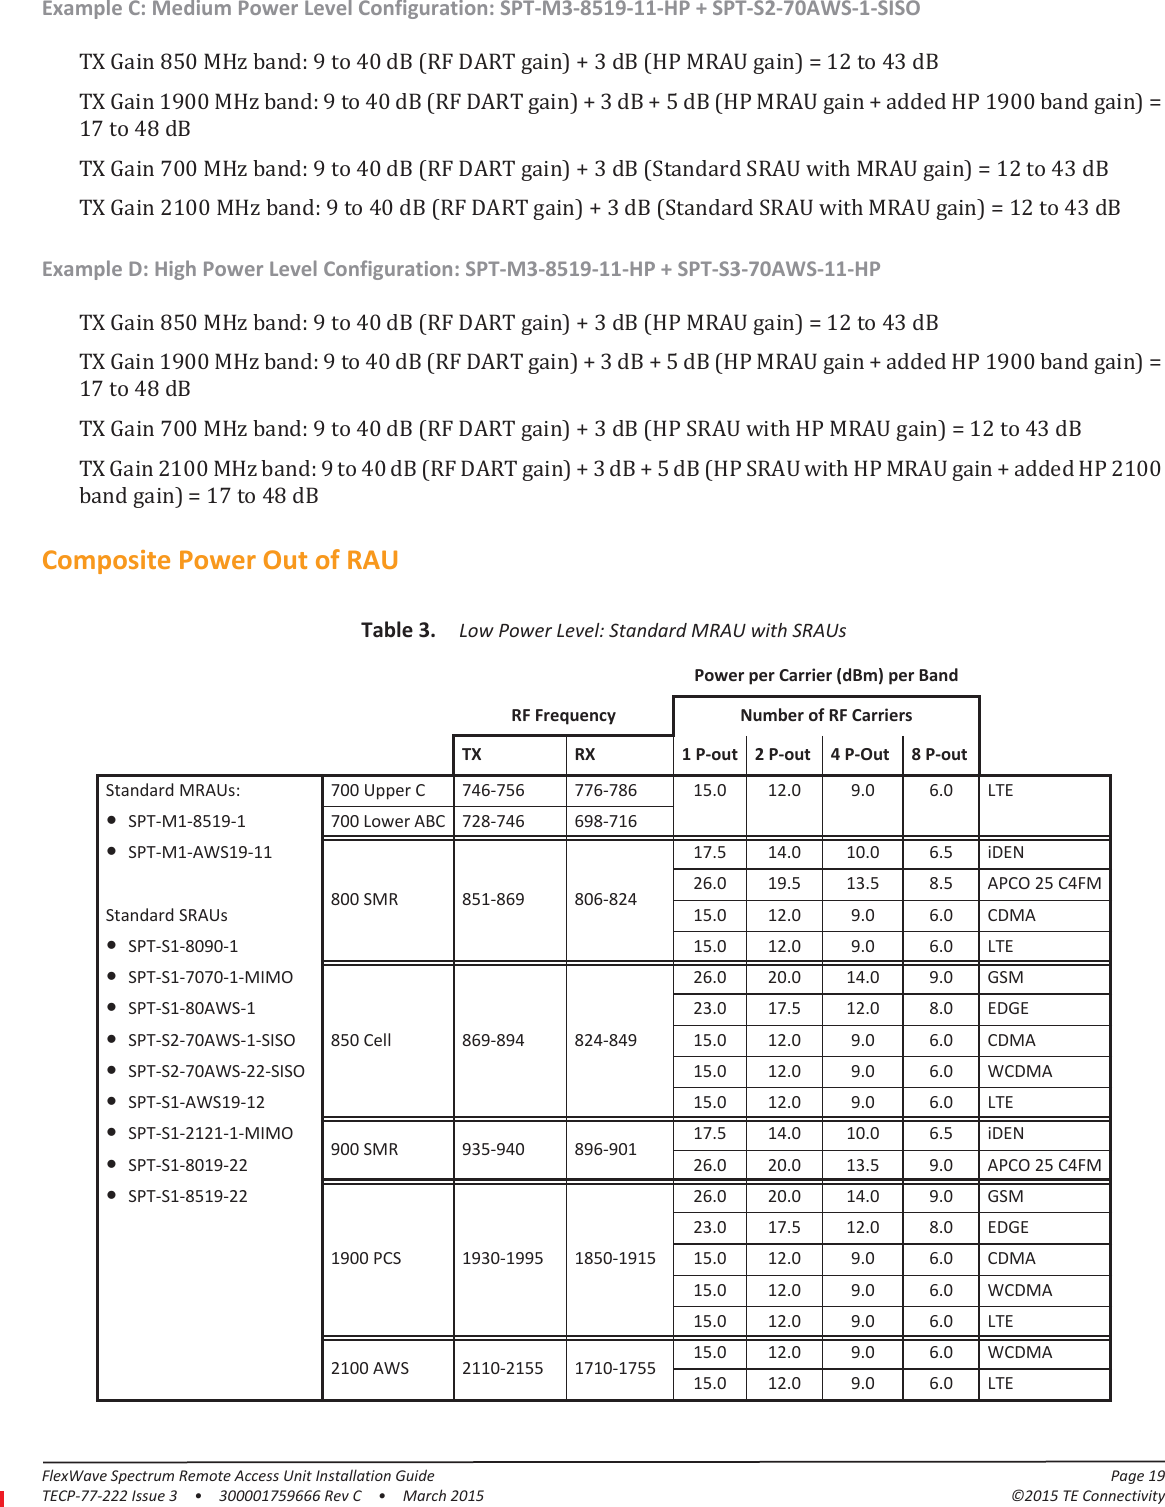 FlexWave Spectrum Remote Access Unit Installation Guide Page 19TECP-77-222 Issue 3  •  300001759666 Rev C  •  March 2015 ©2015 TE ConnectivityExample C: Medium Power Level Configuration: SPT-M3-8519-11-HP + SPT-S2-70AWS-1-SISOTX Gain 850 MHz band: 9 to 40 dB (RF DART gain) + 3 dB (HP MRAU gain) = 12 to 43 dBTX Gain 1900 MHz band: 9 to 40 dB (RF DART gain) + 3 dB + 5 dB (HP MRAU gain + added HP 1900 band gain) = 17 to 48 dBTX Gain 700 MHz band: 9 to 40 dB (RF DART gain) + 3 dB (Standard SRAU with MRAU gain) = 12 to 43 dBTX Gain 2100 MHz band: 9 to 40 dB (RF DART gain) + 3 dB (Standard SRAU with MRAU gain) = 12 to 43 dBExample D: High Power Level Configuration: SPT-M3-8519-11-HP + SPT-S3-70AWS-11-HPTX Gain 850 MHz band: 9 to 40 dB (RF DART gain) + 3 dB (HP MRAU gain) = 12 to 43 dBTX Gain 1900 MHz band: 9 to 40 dB (RF DART gain) + 3 dB + 5 dB (HP MRAU gain + added HP 1900 band gain) = 17 to 48 dBTX Gain 700 MHz band: 9 to 40 dB (RF DART gain) + 3 dB (HP SRAU with HP MRAU gain) = 12 to 43 dBTX Gain 2100 MHz band: 9 to 40 dB (RF DART gain) + 3 dB + 5 dB (HP SRAU with HP MRAU gain + added HP 2100 band gain) = 17 to 48 dBComposite Power Out of RAUTable 3.  Low Power Level: Standard MRAU with SRAUsPower per Carrier (dBm) per BandRF Frequency Number of RF CarriersTX RX 1 P-out 2 P-out 4 P-Out 8 P-outStandard MRAUs: 700 Upper C 746-756 776-786 15.0 12.0 9.0 6.0 LTE•SPT-M1-8519-1 700 Lower ABC 728-746 698-716•SPT-M1-AWS19-11800 SMR 851-869 806-82417.5 14.0 10.0 6.5 iDEN26.0 19.5 13.5 8.5 APCO 25 C4FMStandard SRAUs 15.0 12.0 9.0 6.0 CDMA•SPT-S1-8090-1 15.0 12.0 9.0 6.0 LTE•SPT-S1-7070-1-MIMO850 Cell 869-894 824-84926.0 20.0 14.0 9.0 GSM•SPT-S1-80AWS-1 23.0 17.5 12.0 8.0 EDGE•SPT-S2-70AWS-1-SISO 15.0 12.0 9.0 6.0 CDMA•SPT-S2-70AWS-22-SISO 15.0 12.0 9.0 6.0 WCDMA•SPT-S1-AWS19-12 15.0 12.0 9.0 6.0 LTE•SPT-S1-2121-1-MIMO 900 SMR 935-940 896-901 17.5 14.0 10.0 6.5 iDEN•SPT-S1-8019-22 26.0 20.0 13.5 9.0 APCO 25 C4FM•SPT-S1-8519-221900 PCS 1930-1995 1850-191526.0 20.0 14.0 9.0 GSM23.0 17.5 12.0 8.0 EDGE15.0 12.0 9.0 6.0 CDMA15.0 12.0 9.0 6.0 WCDMA15.0 12.0 9.0 6.0 LTE2100 AWS 2110-2155 1710-1755 15.0 12.0 9.0 6.0 WCDMA15.0 12.0 9.0 6.0 LTE